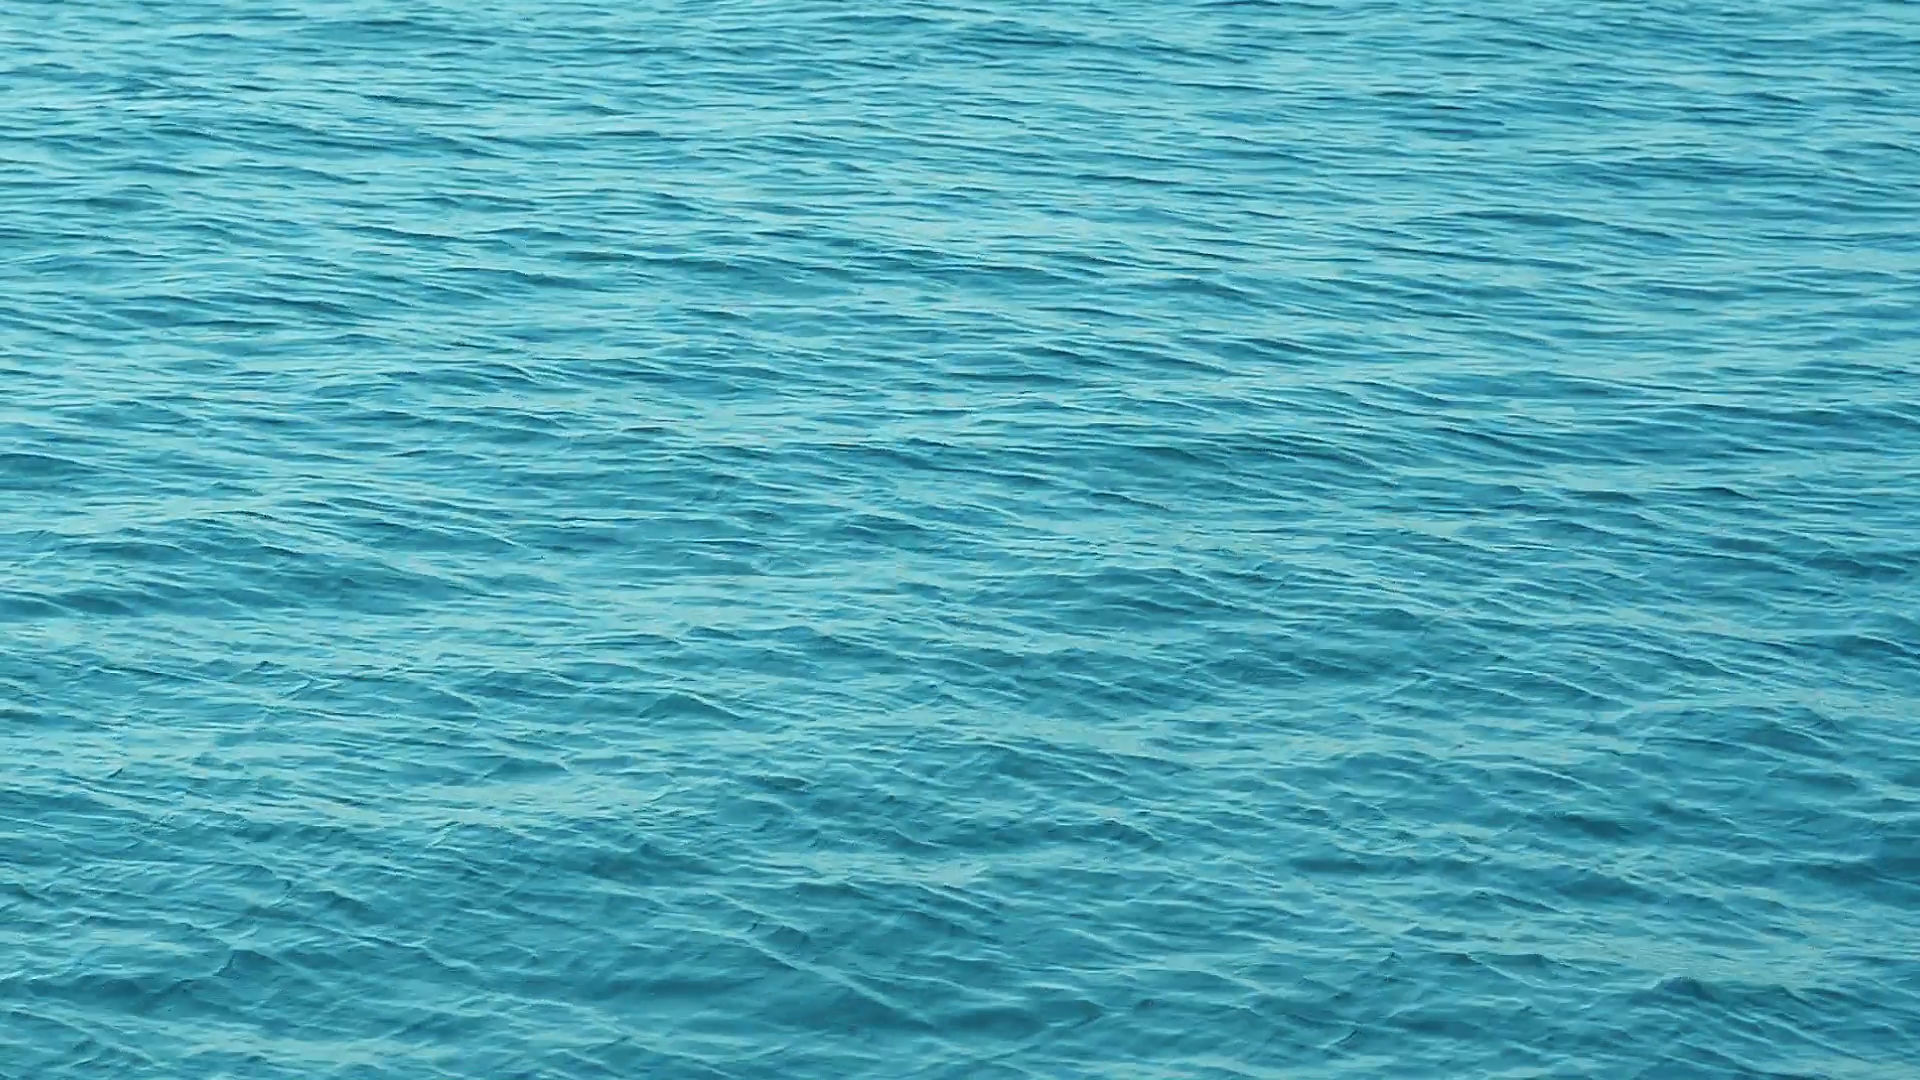 Abstract Sea Water Texture Top View Stock Video Footage - Videoblocks